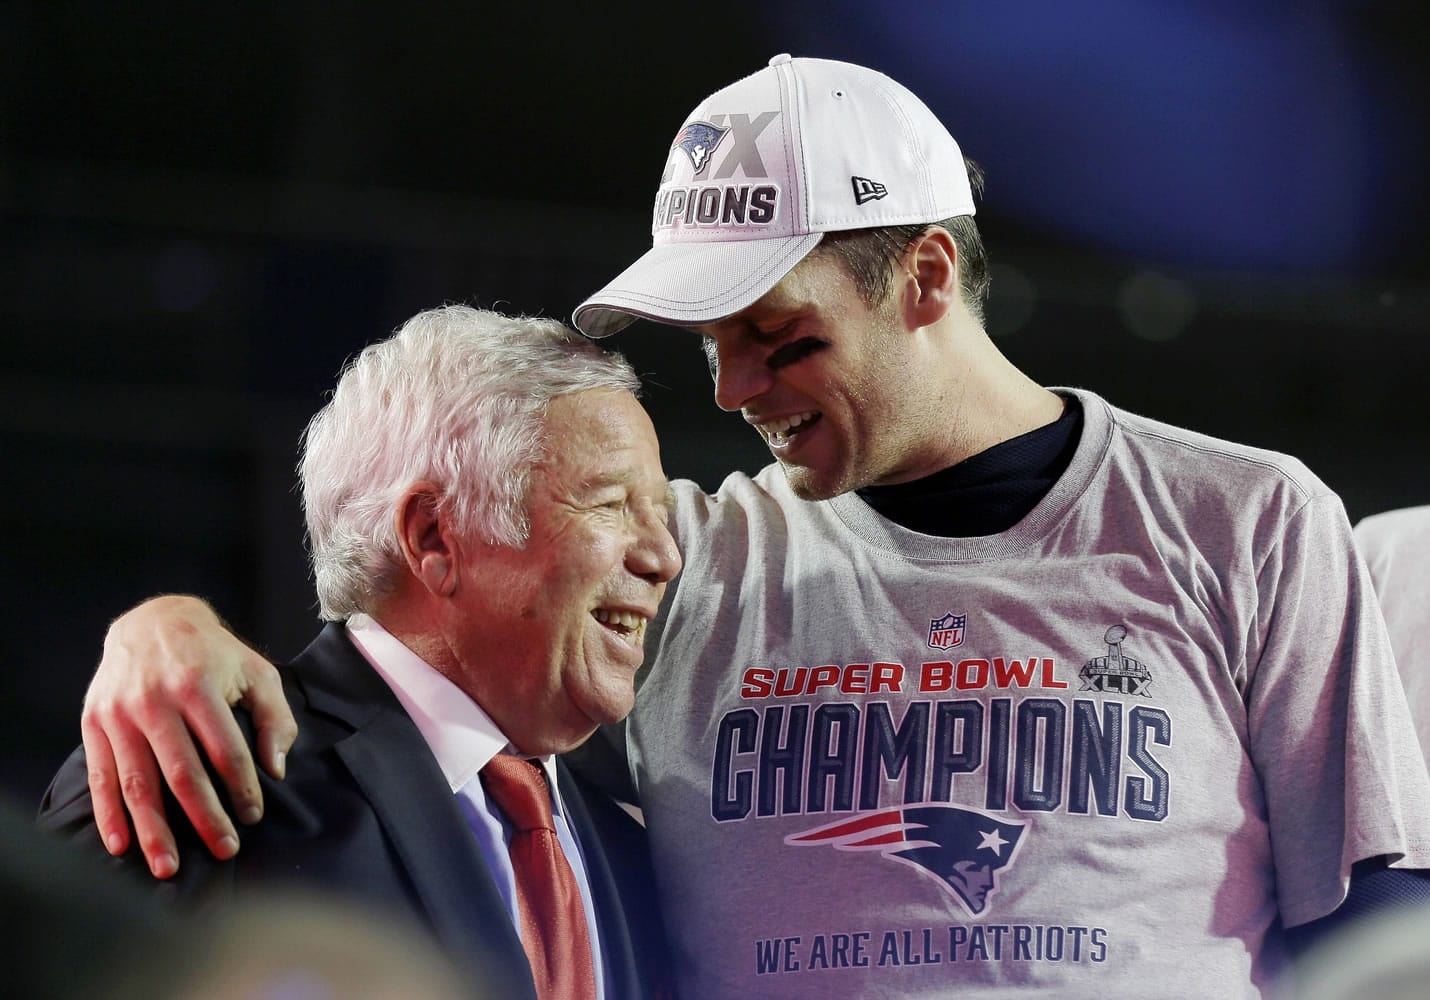 New England Patriots quarterback Tom Brady, right, celebrates with owner Robert Kraft after the NFL Super Bowl XLIX football game against the Seattle Seahawks on Sunday in Glendale, Ariz.